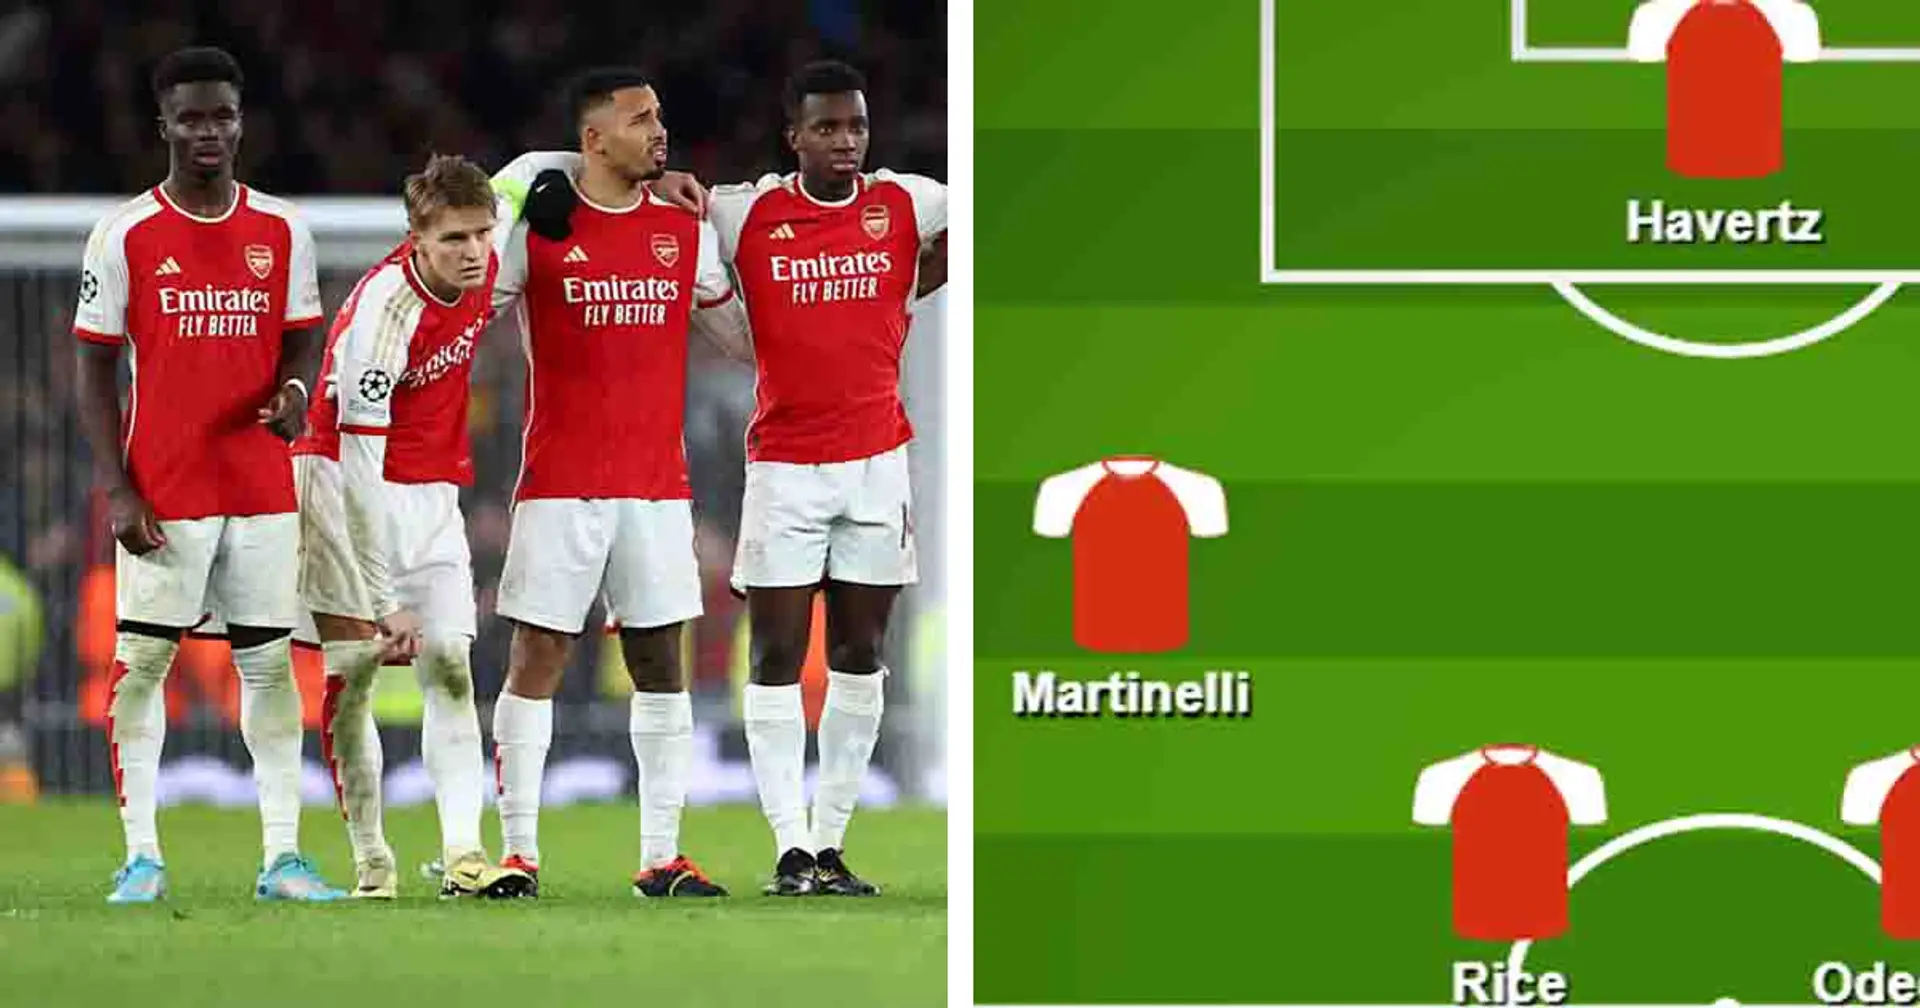 Martinelli returns: Team news and probable lineups for Arsenal vs Bayern Munich